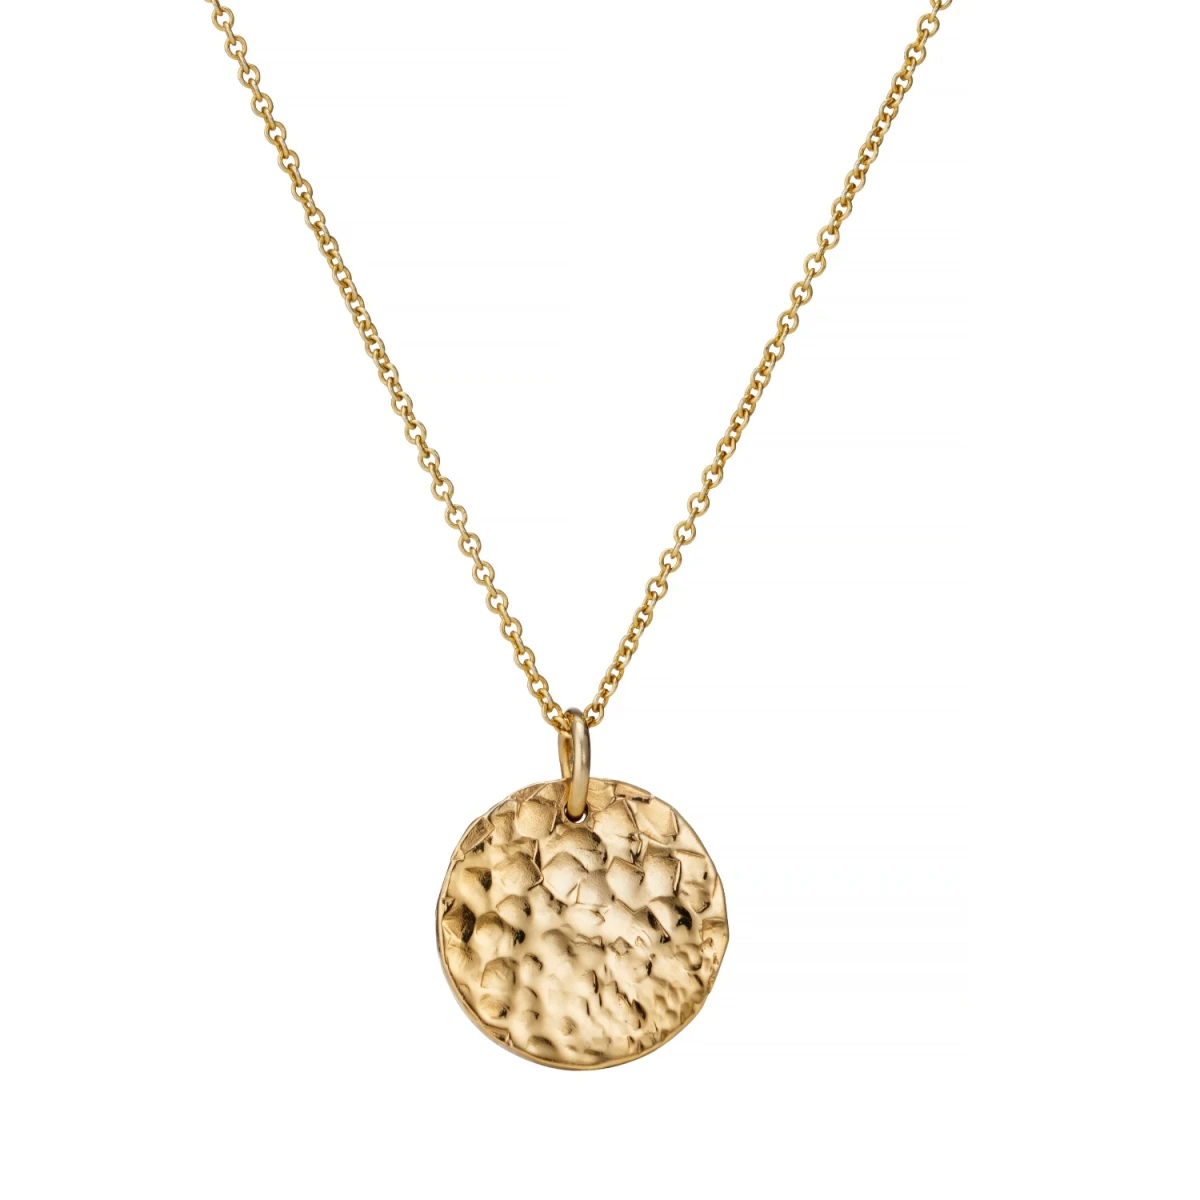 Posh Totty Designs 18ct Gold Plated Textured Disc Necklace